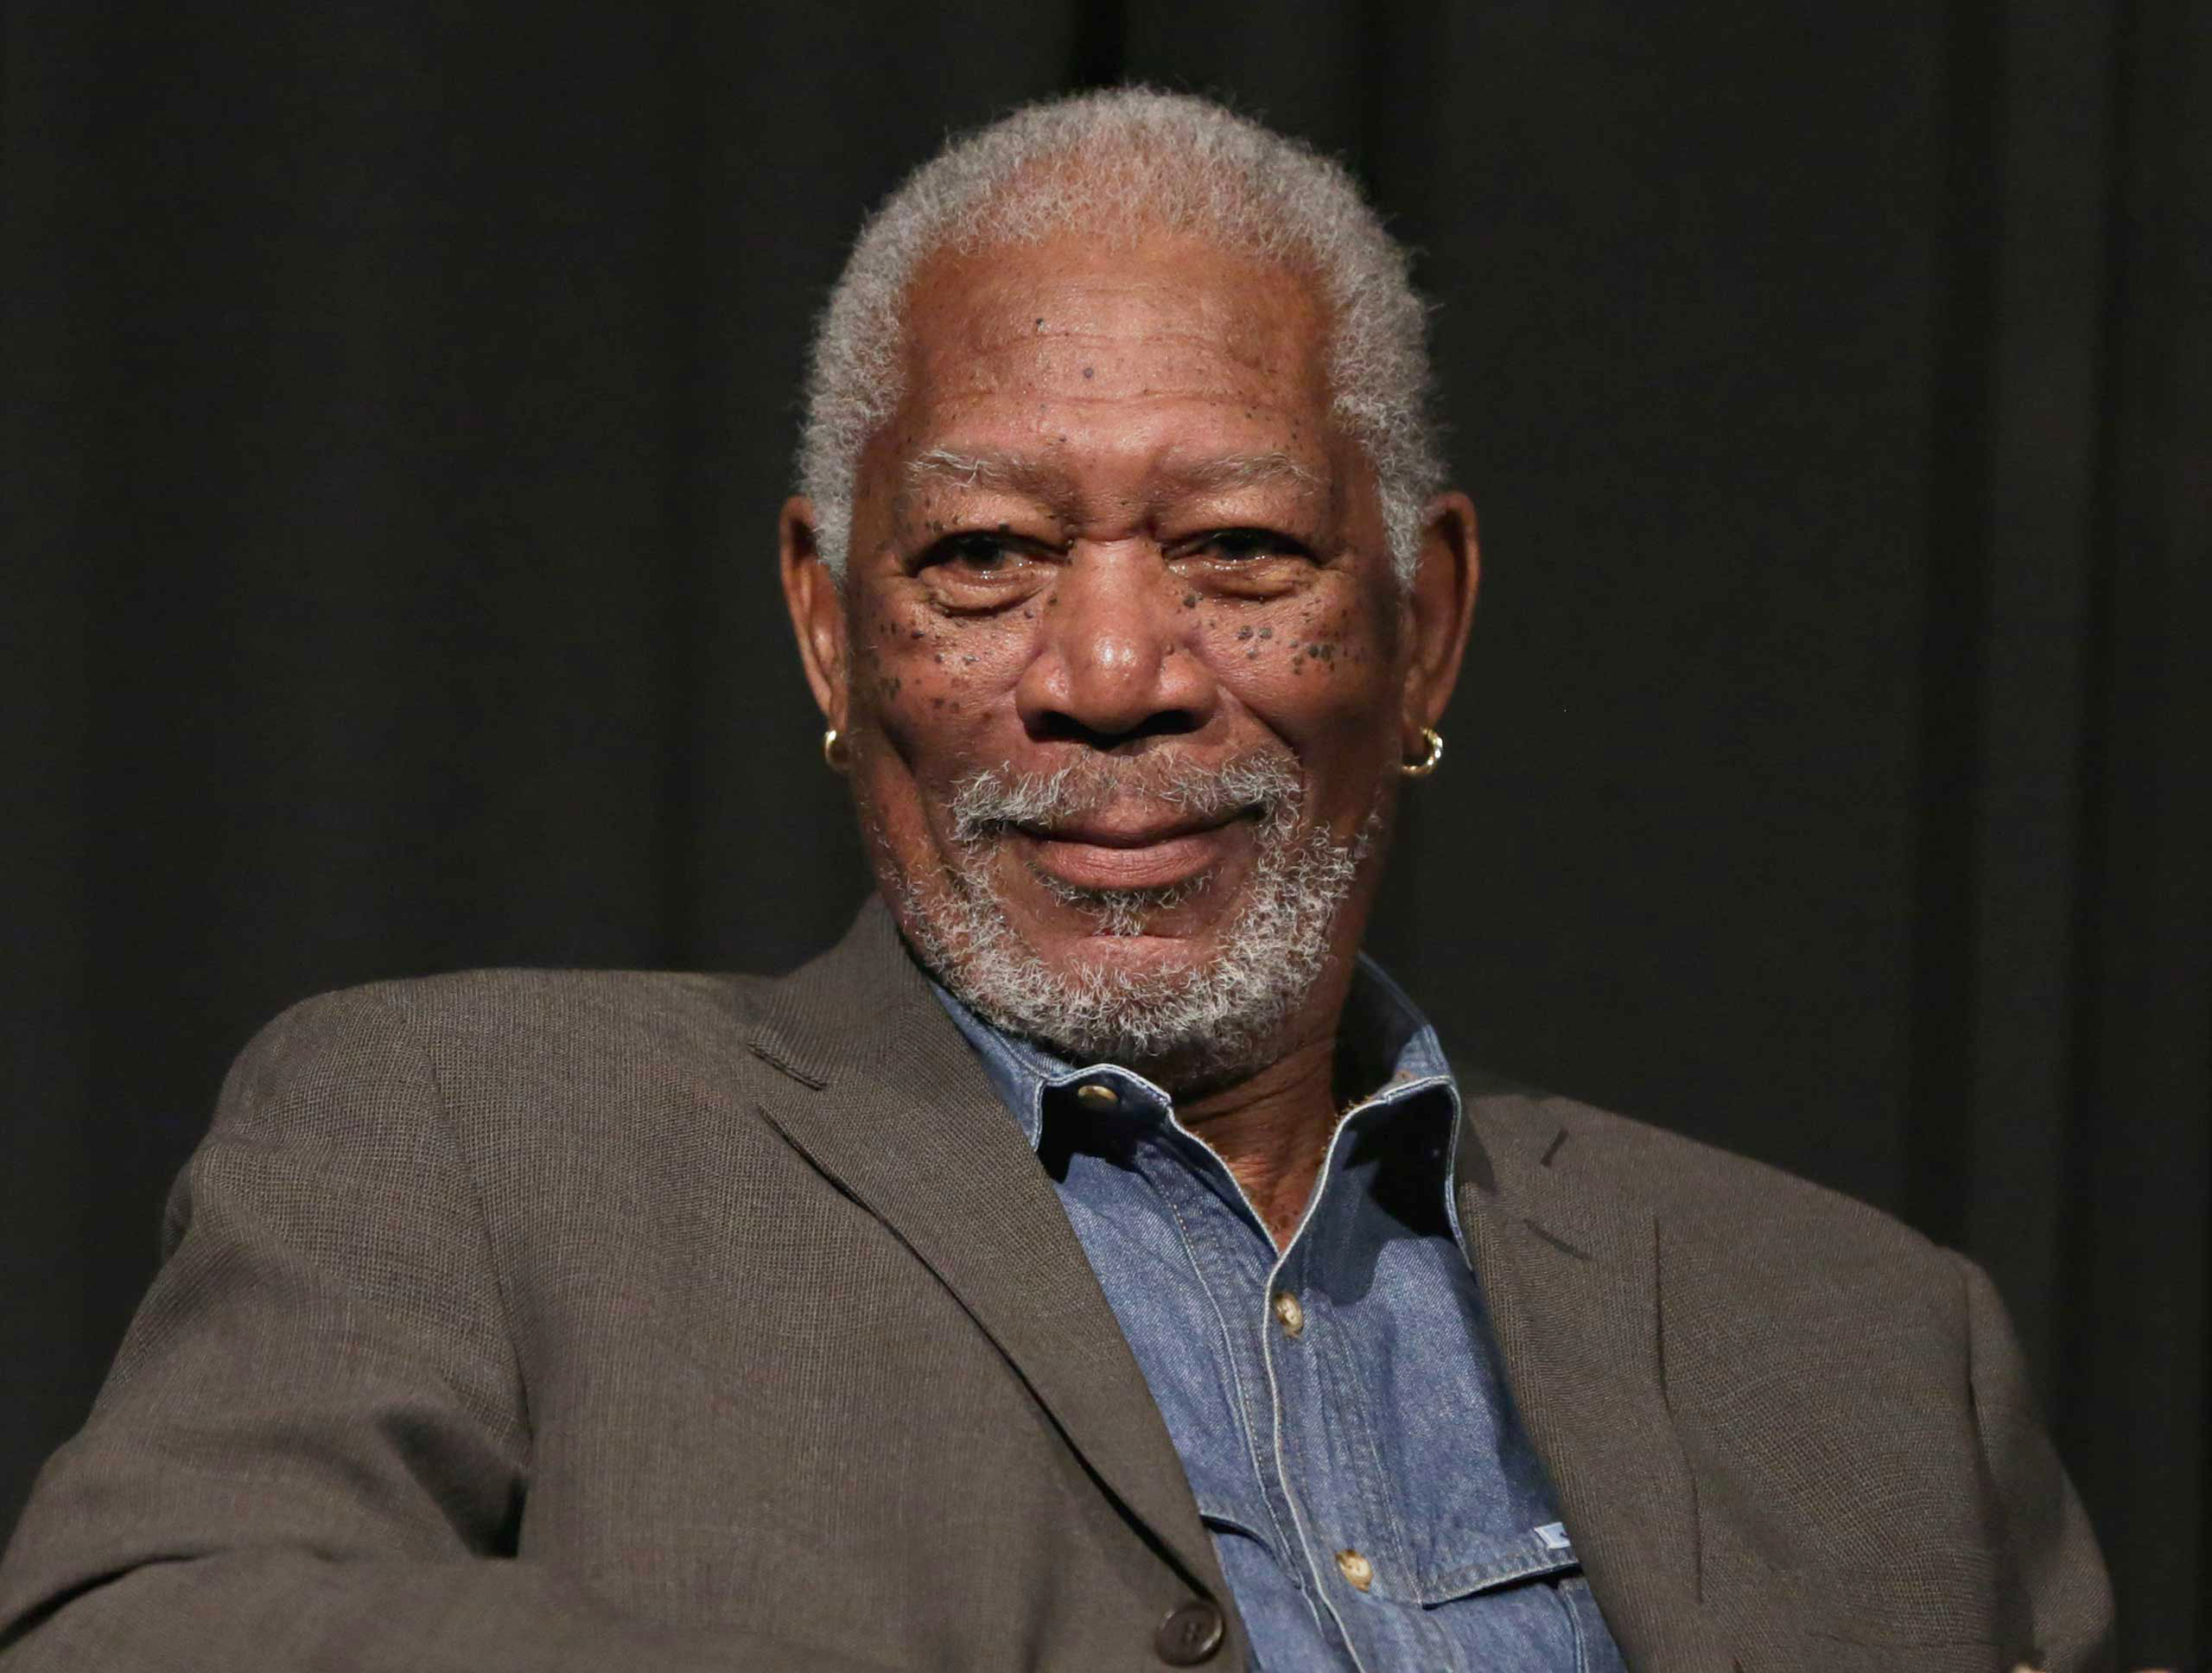 Morgan Freeman takes part in a SiriusXM Town Hall with Morgan Freeman hosted by Entertainment Weekly Radio channel in New York City, on April 30, 2015. (Cindy Ord— Getty Images)